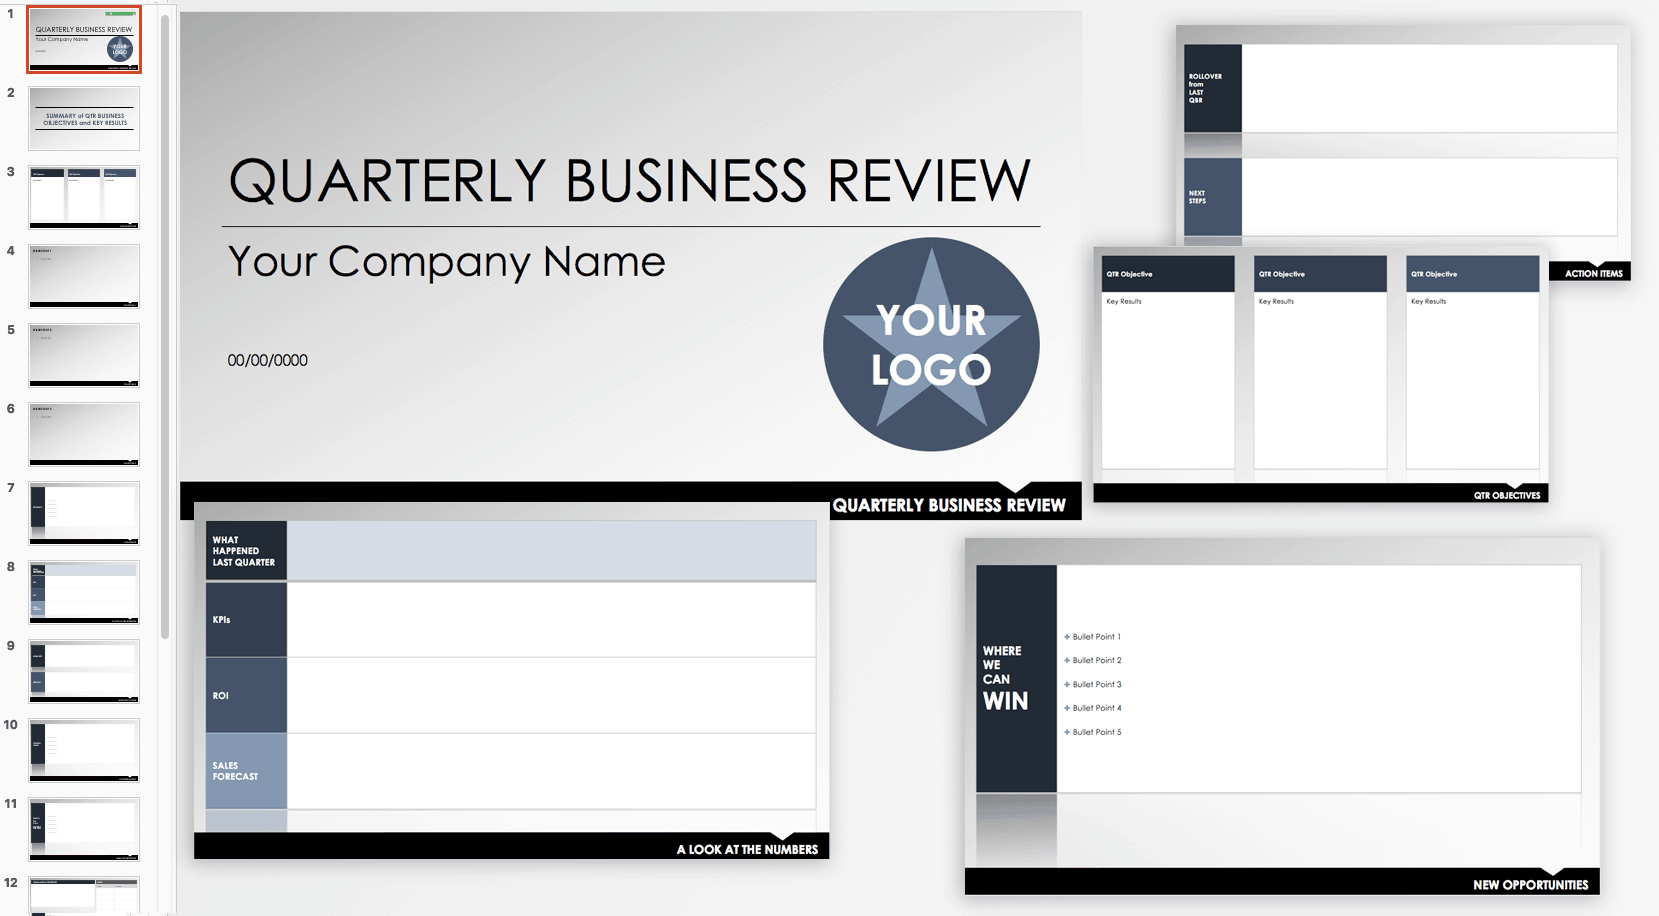 Free Qbr And Business Review Templates | Smartsheet With Regard To Customer Business Review Template